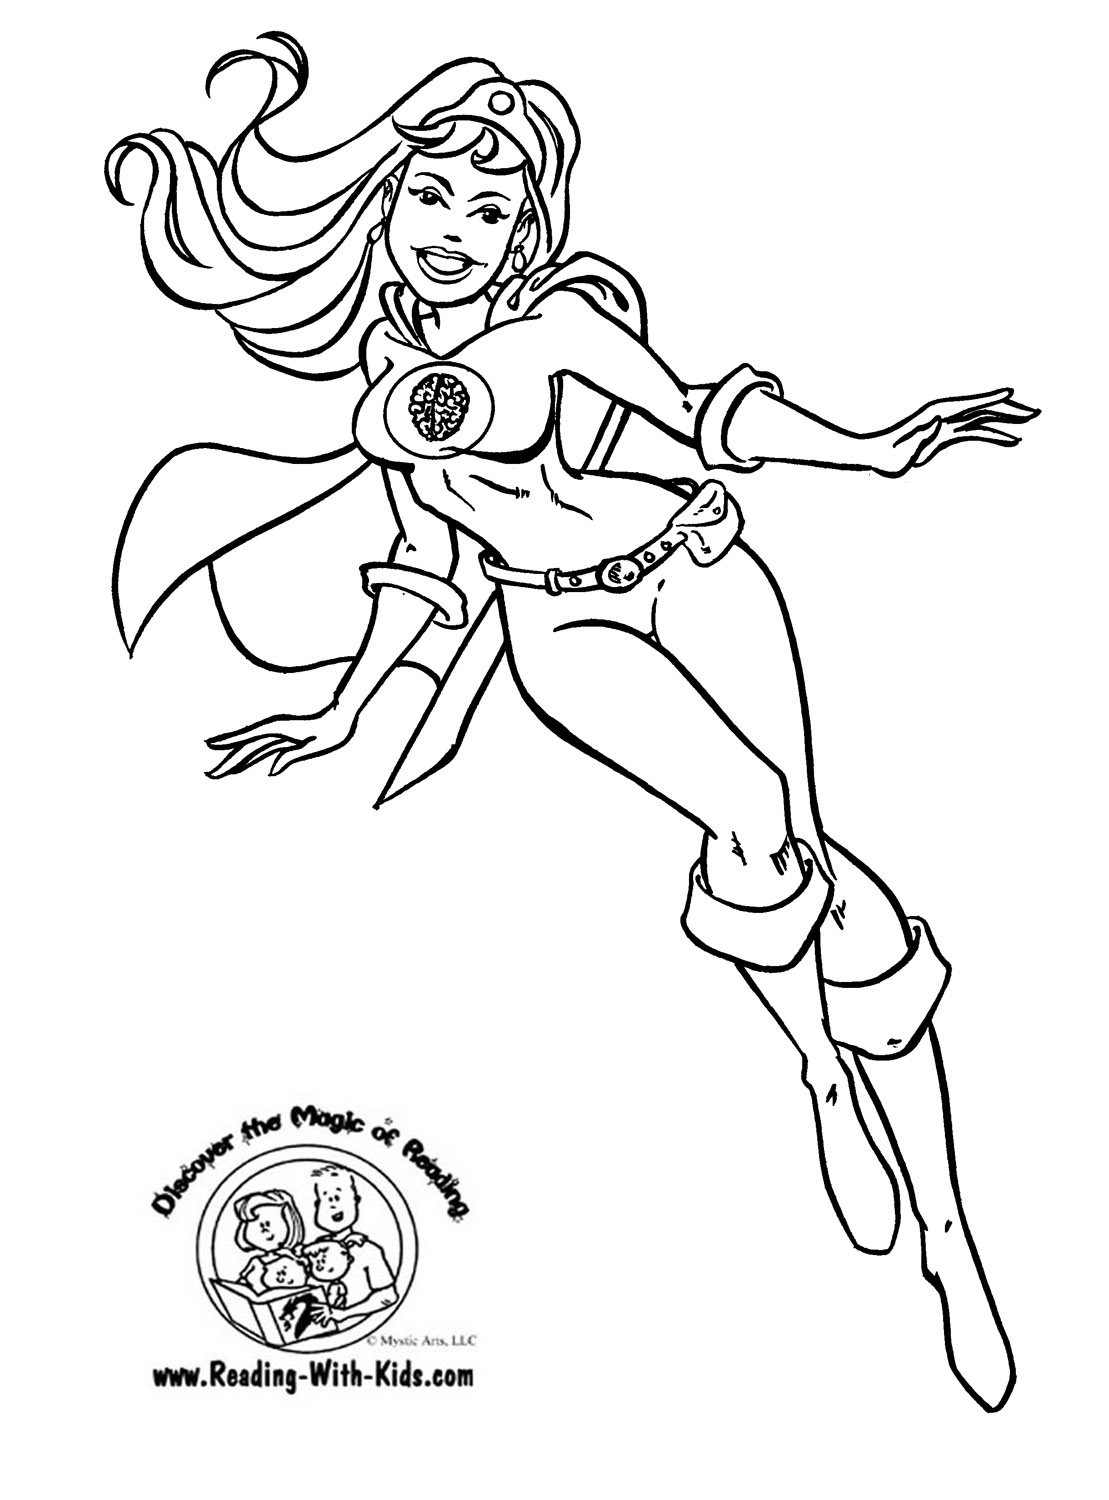 Supergirl Coloring Page